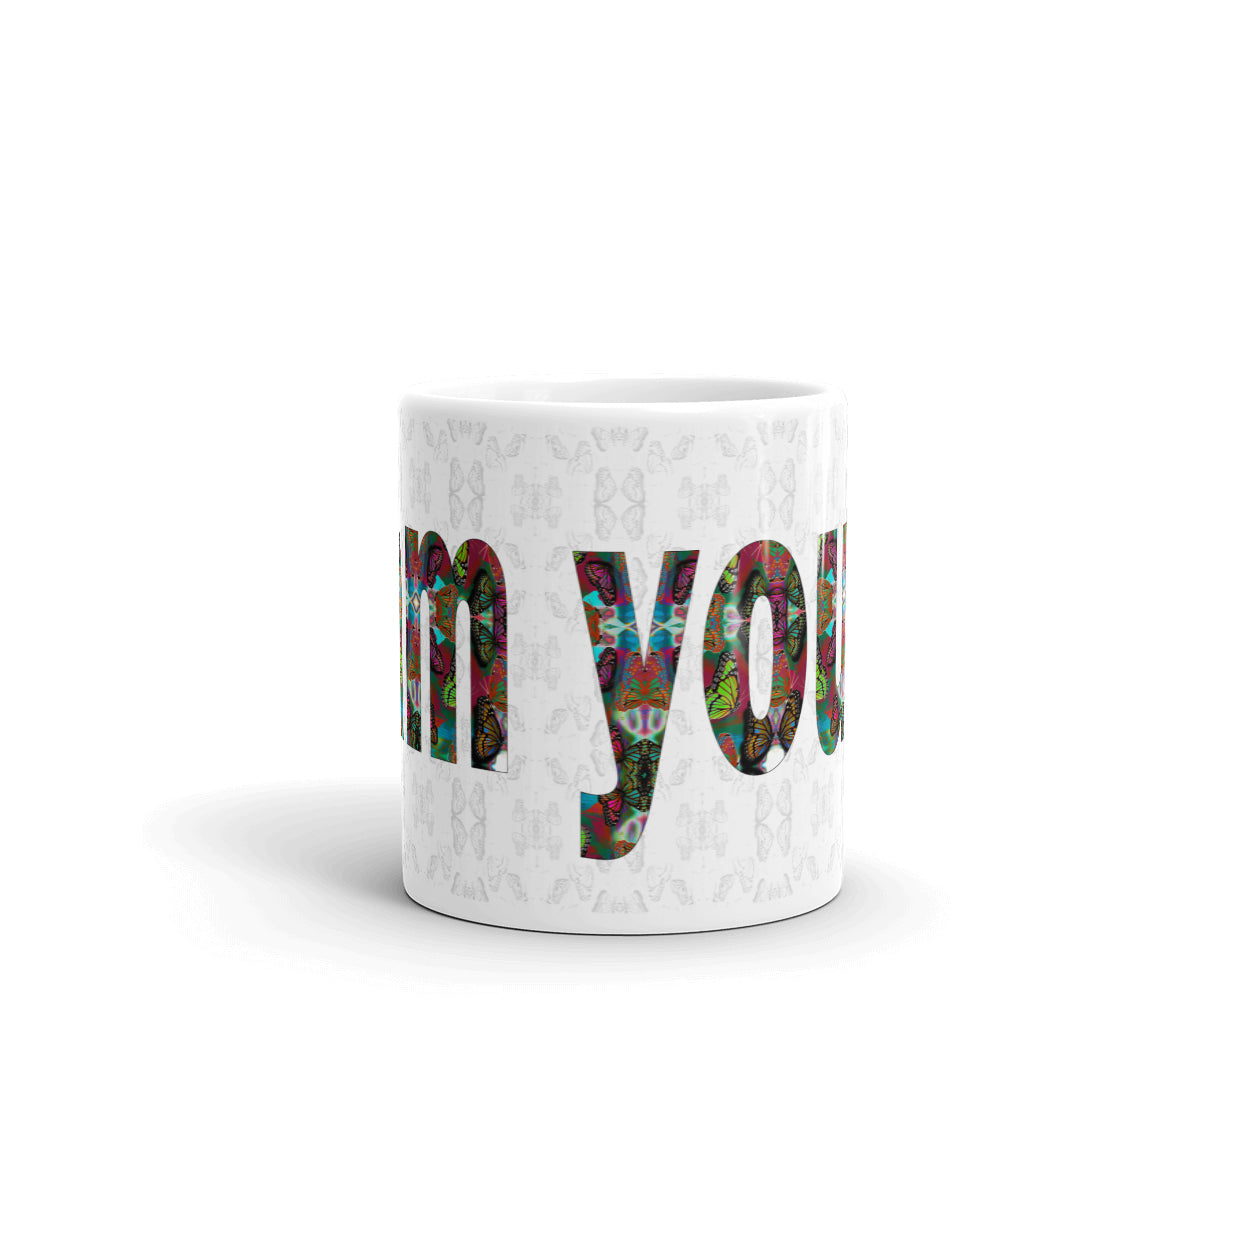 I am yours ~  LOVE ETERNAL Ceramic Mug; Colorful Butterflies Printed Words, Valentine's Day Gift